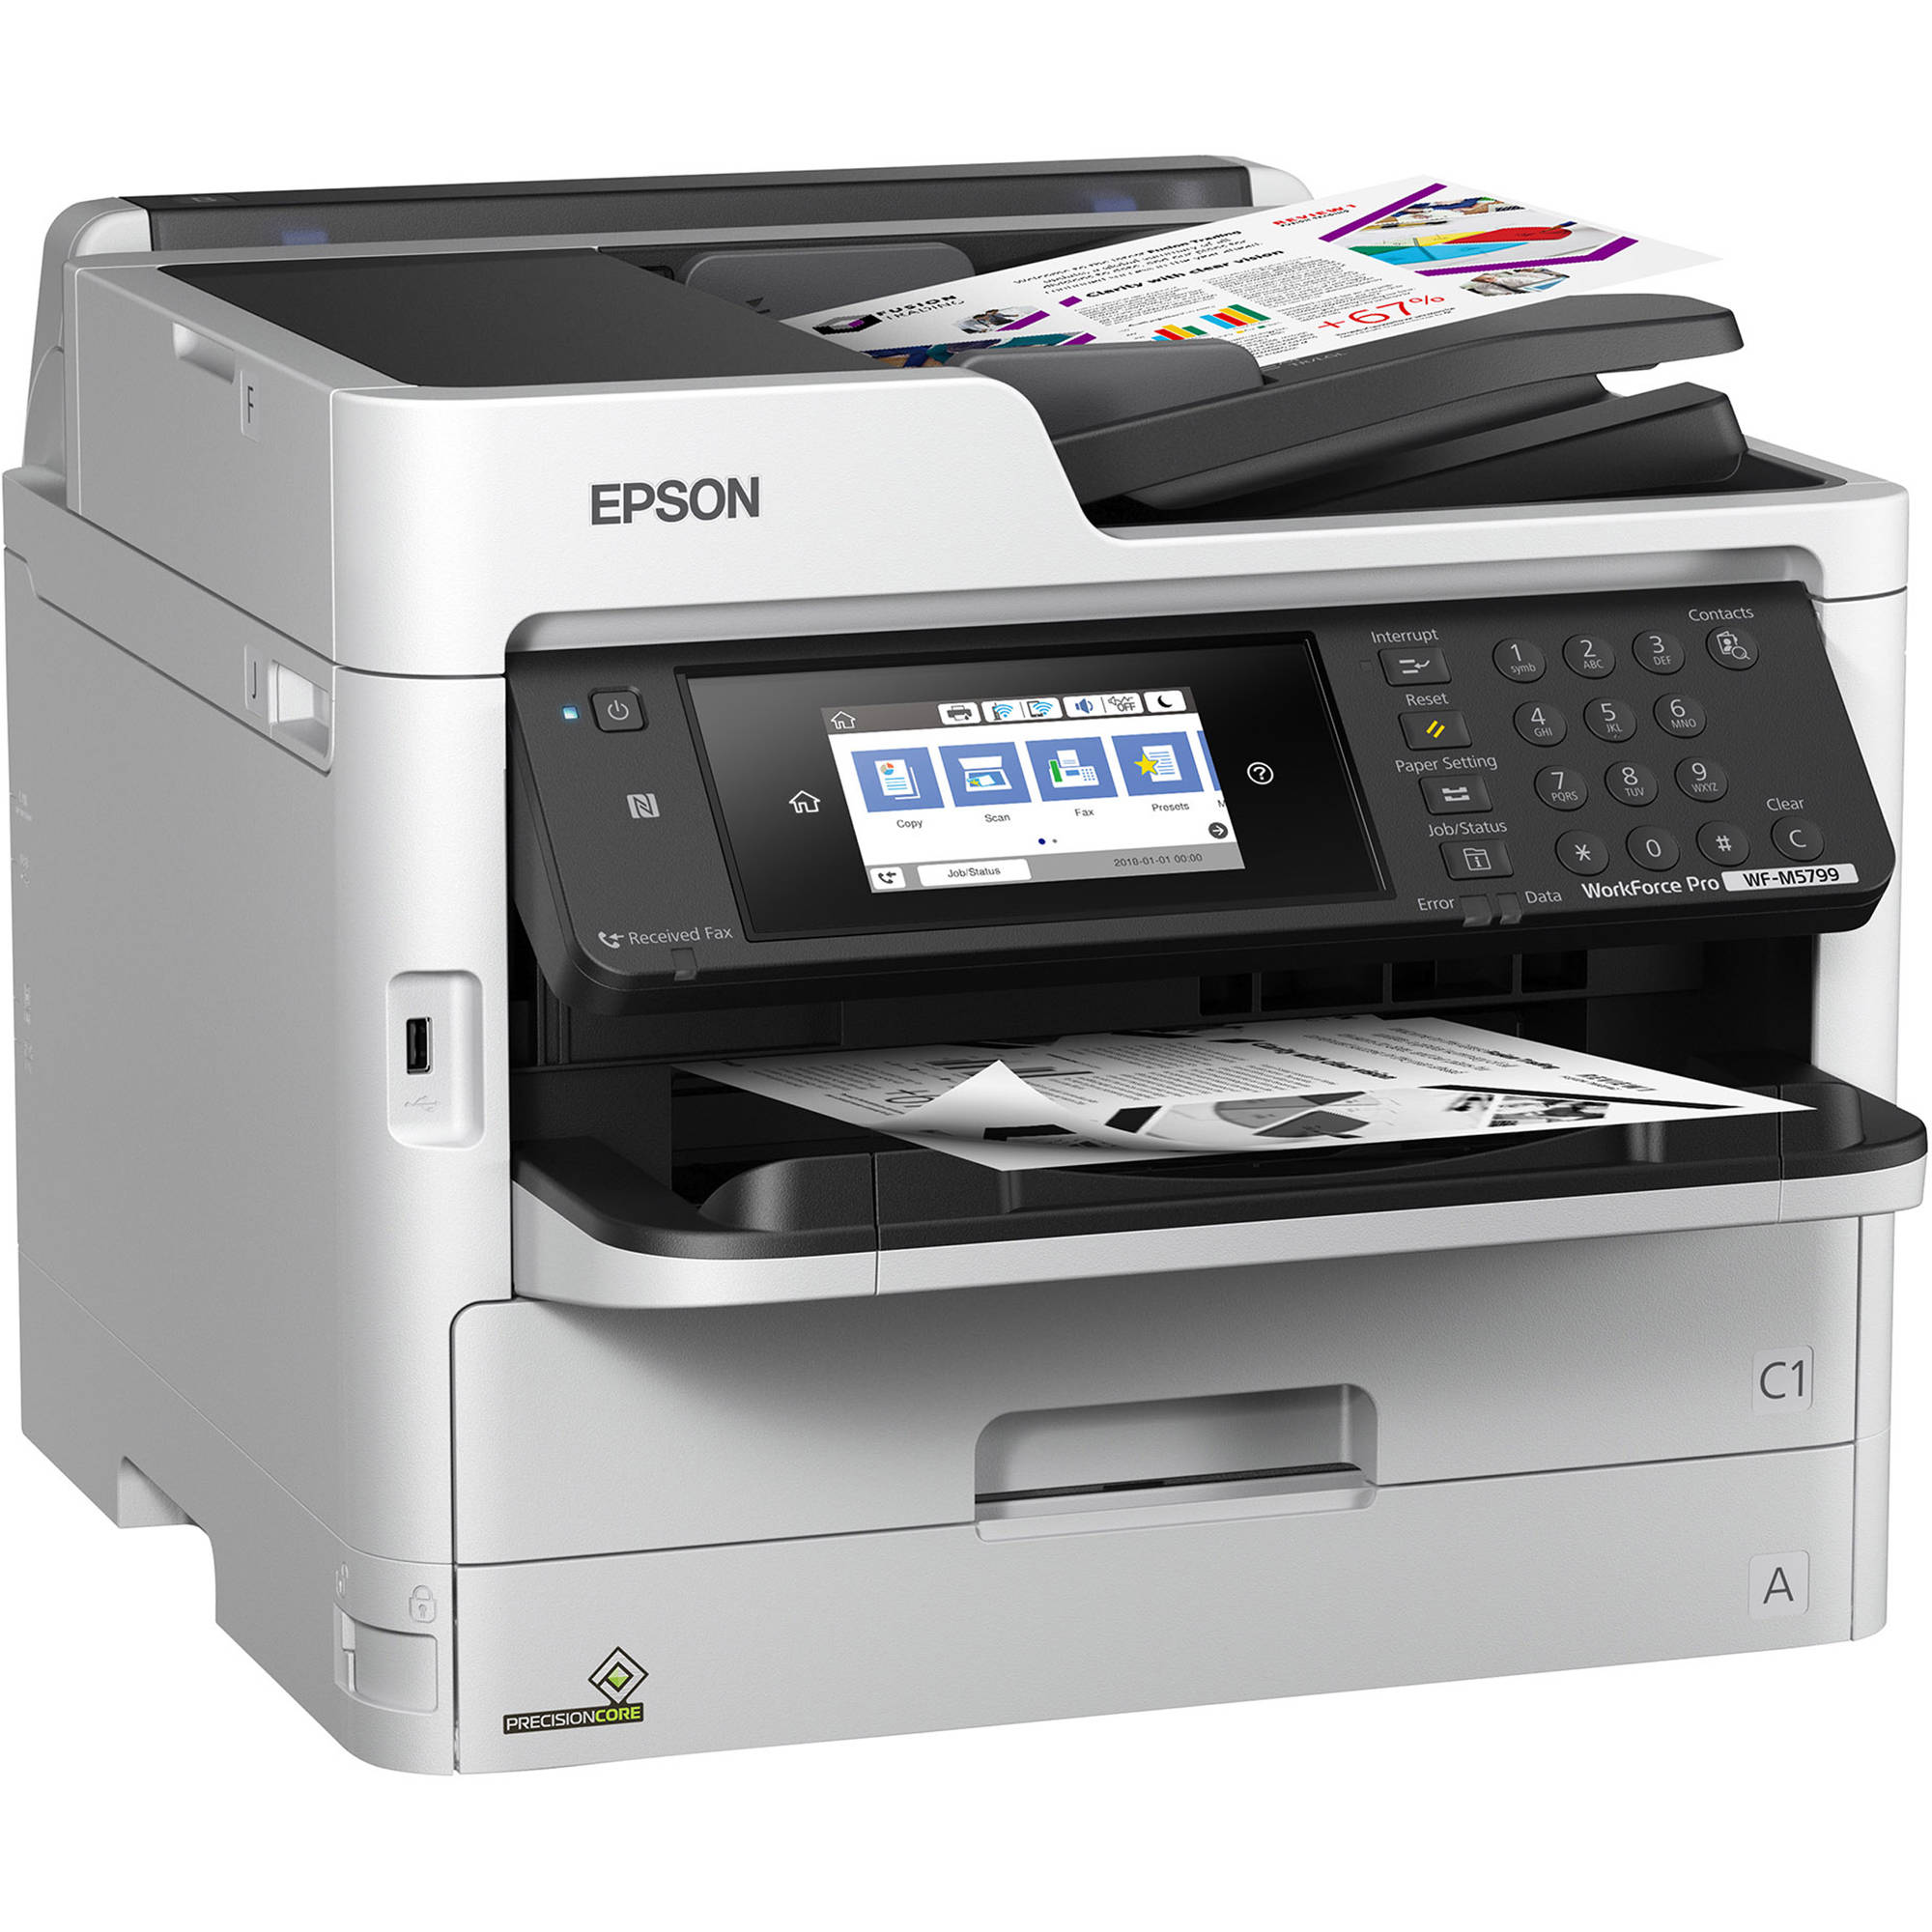 Absolute Toner New Epson Pro WF-M5799 (C11CG04201) Workgroup Monochrome Multifunction Printer With Scanner Copier And Fax For Office Use Showroom Color Copier